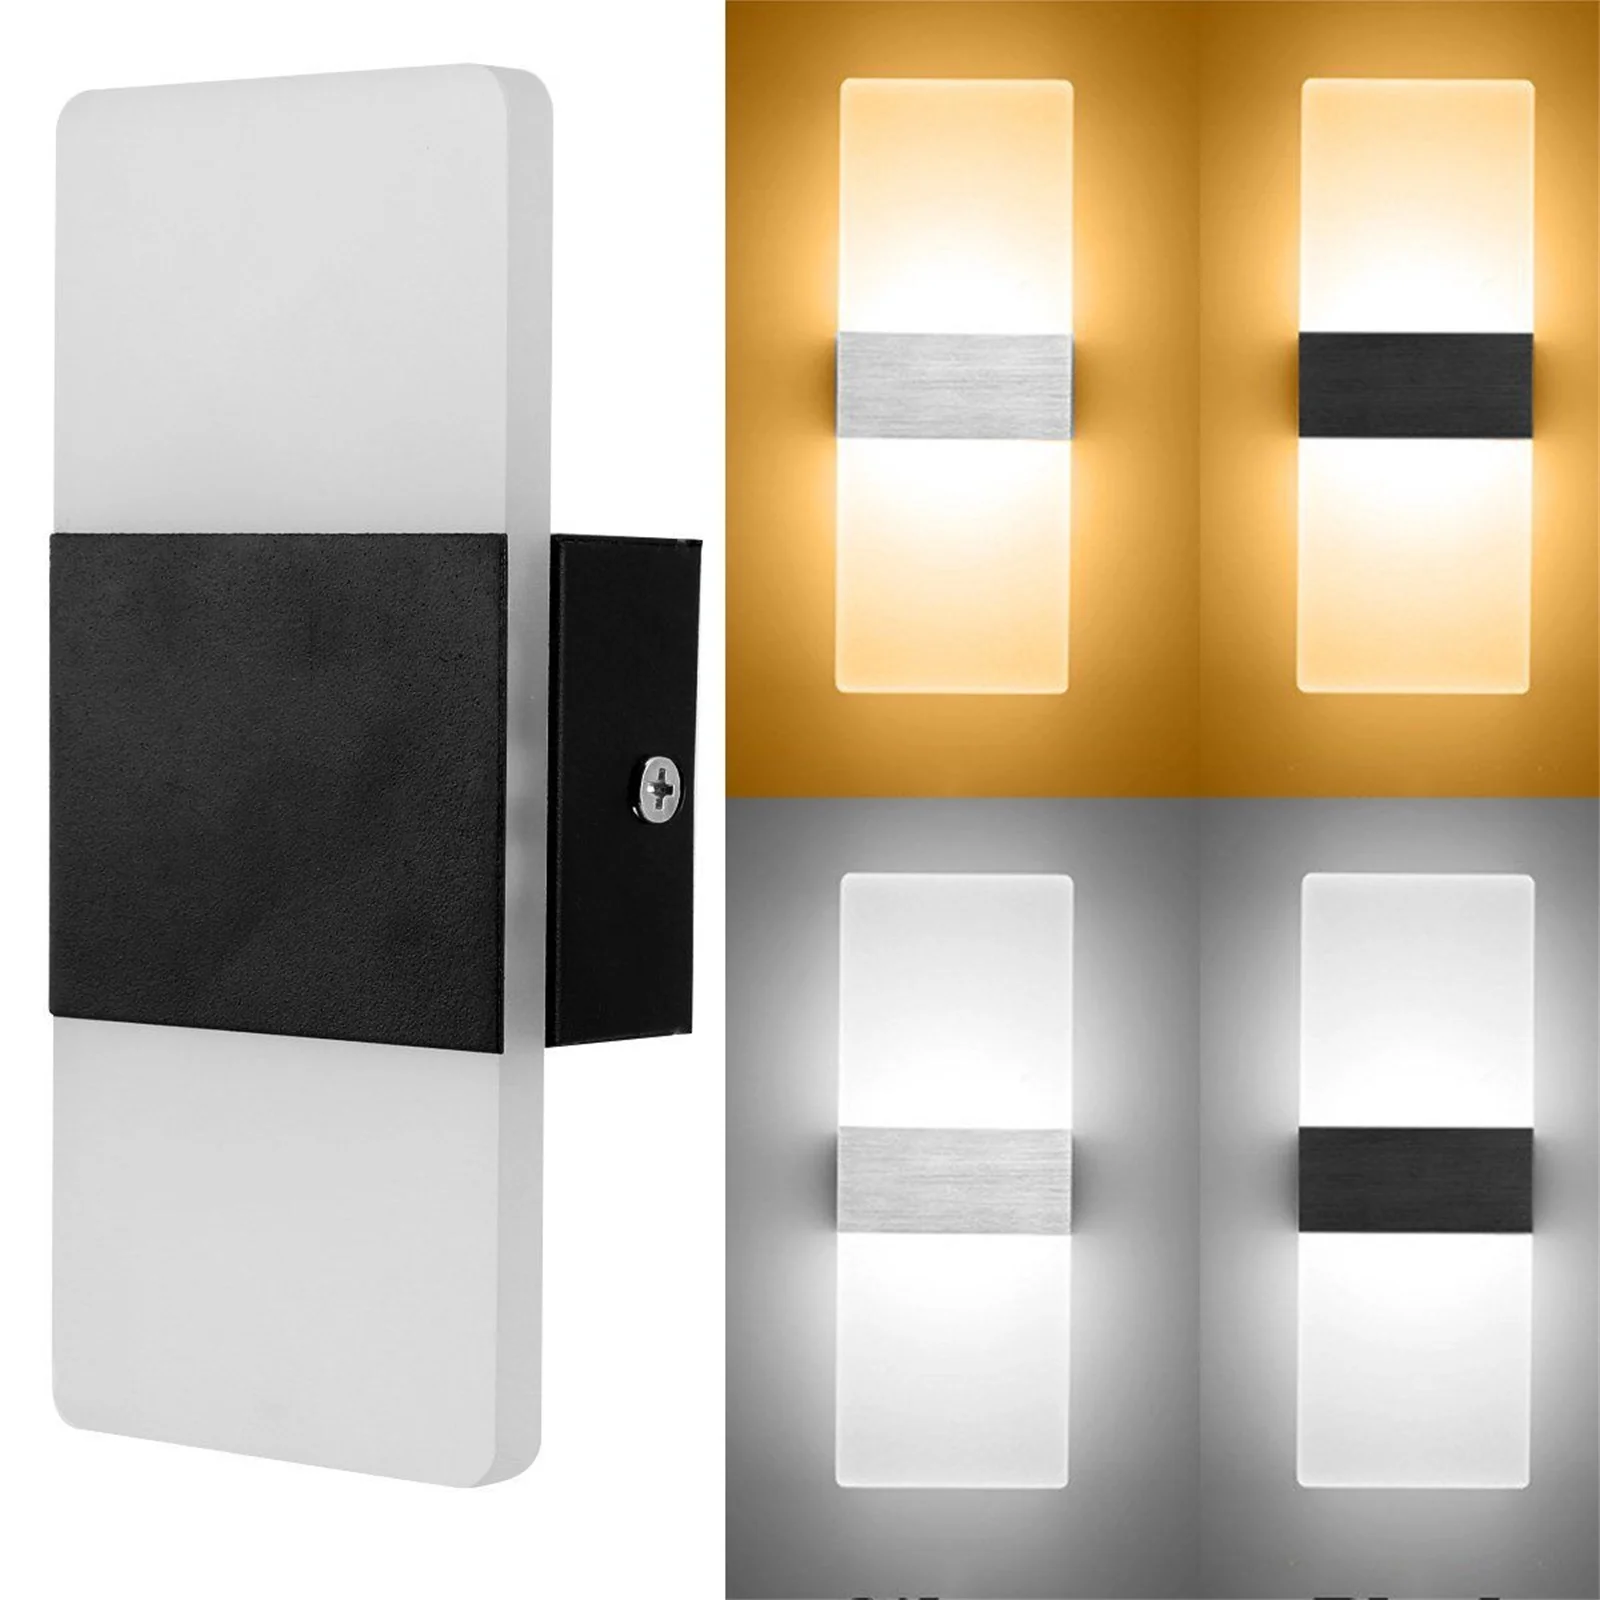 LED Wall Light Up Down Cube Indoor Outdoor Room Sconce Decor Lamp Bedroom Hotel 